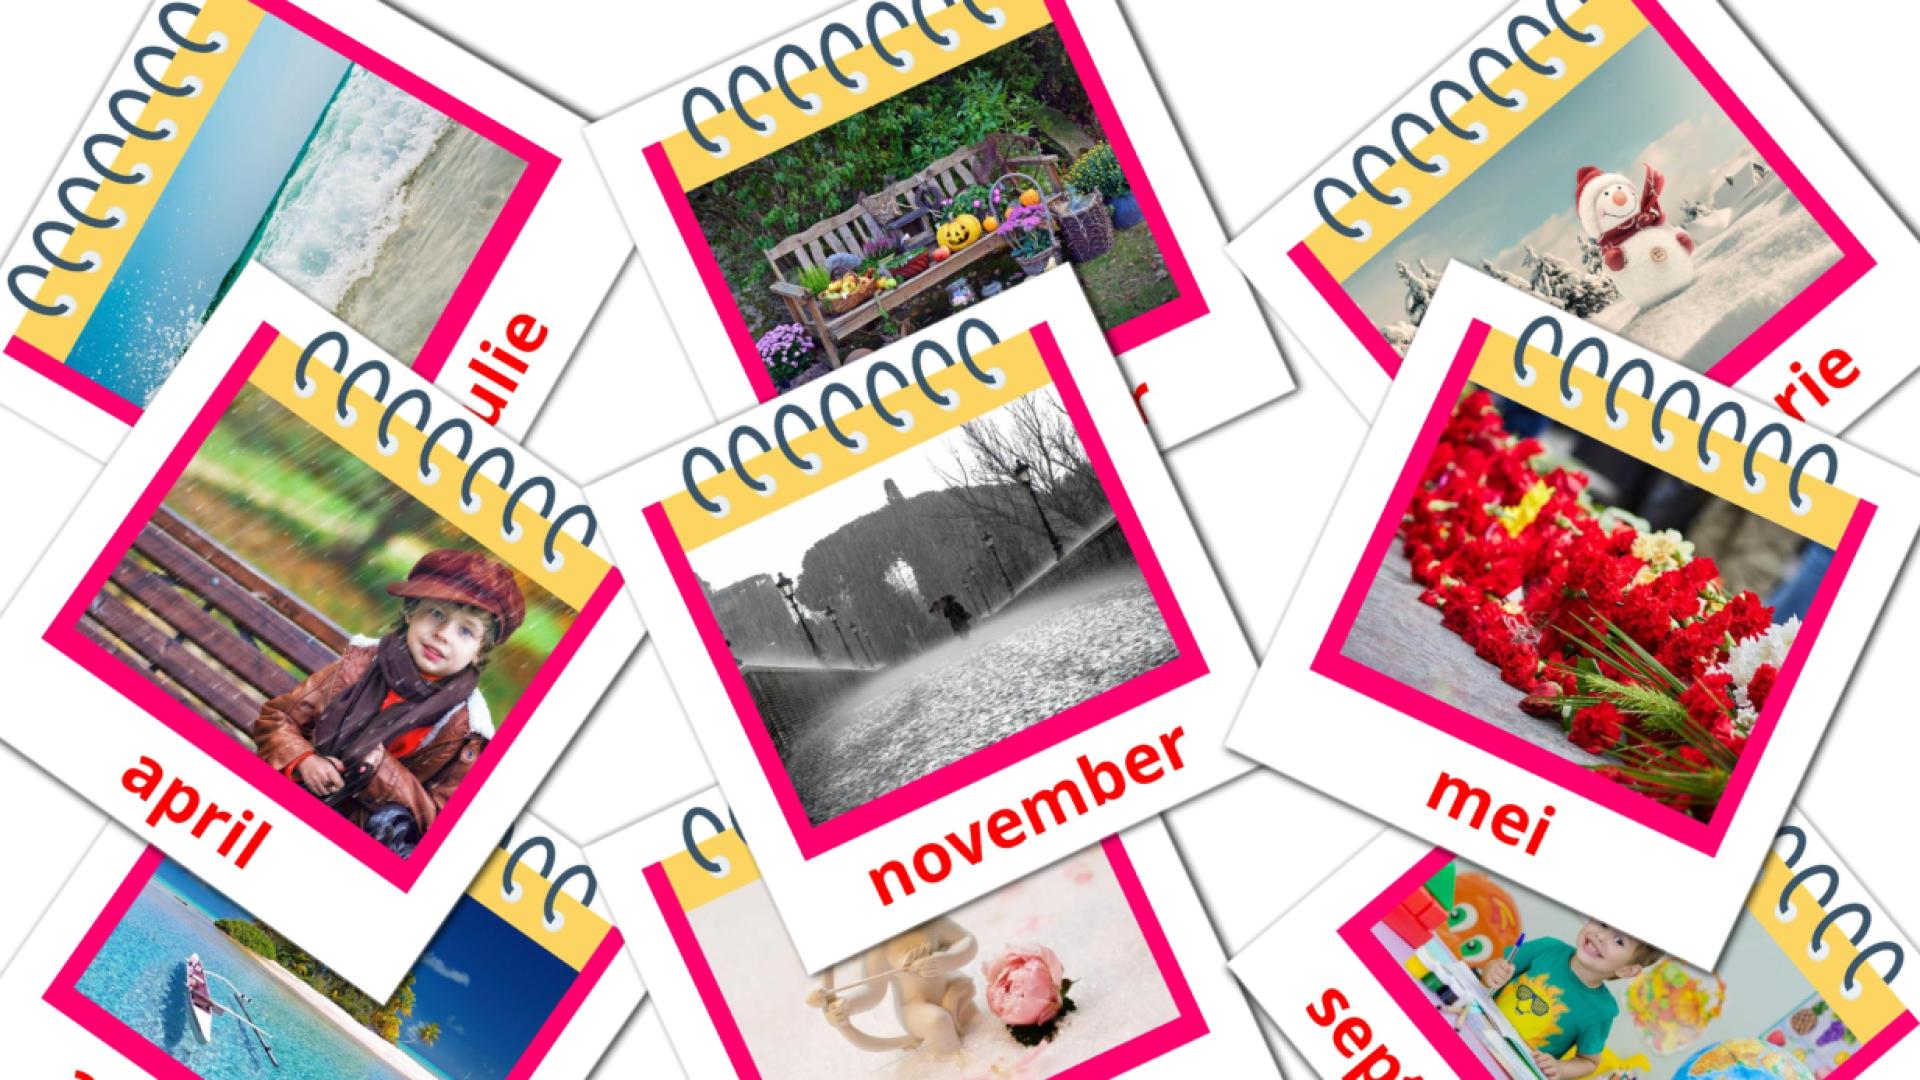 Months of the Year - afrikaans vocabulary cards